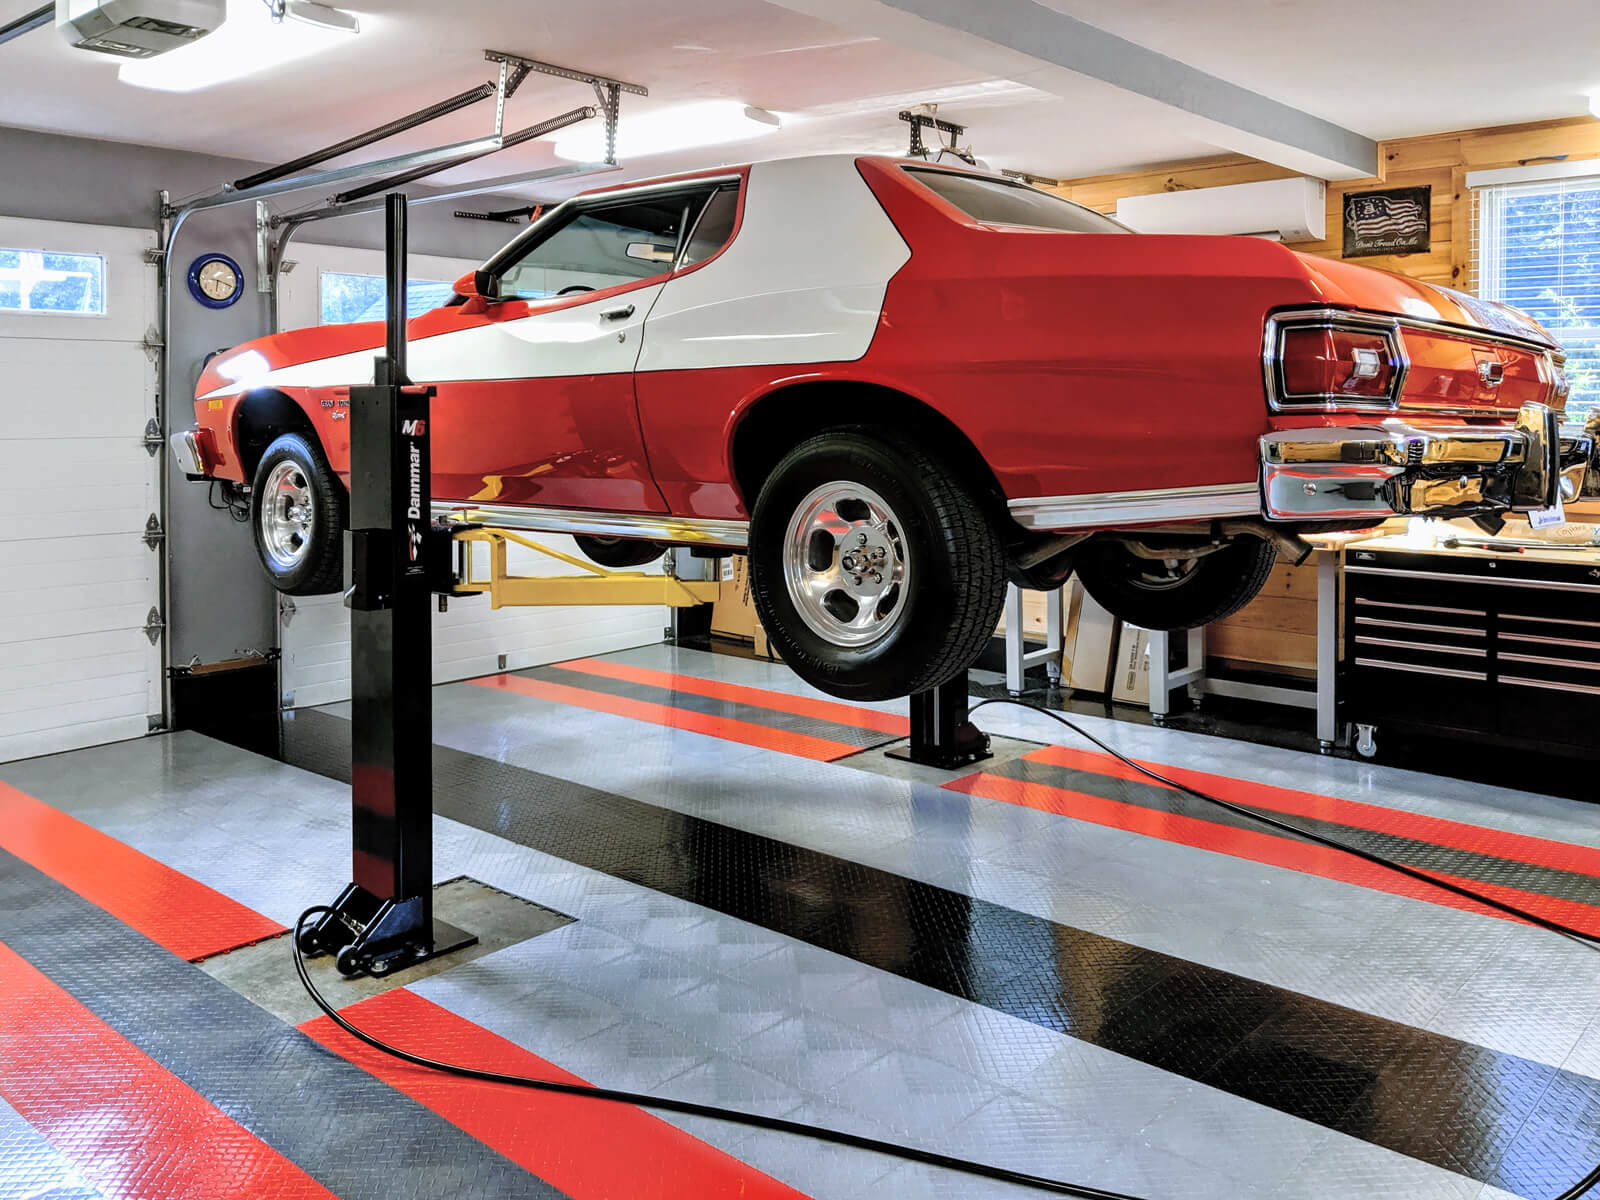 Don's Garage with 1975 Ford Torino lift